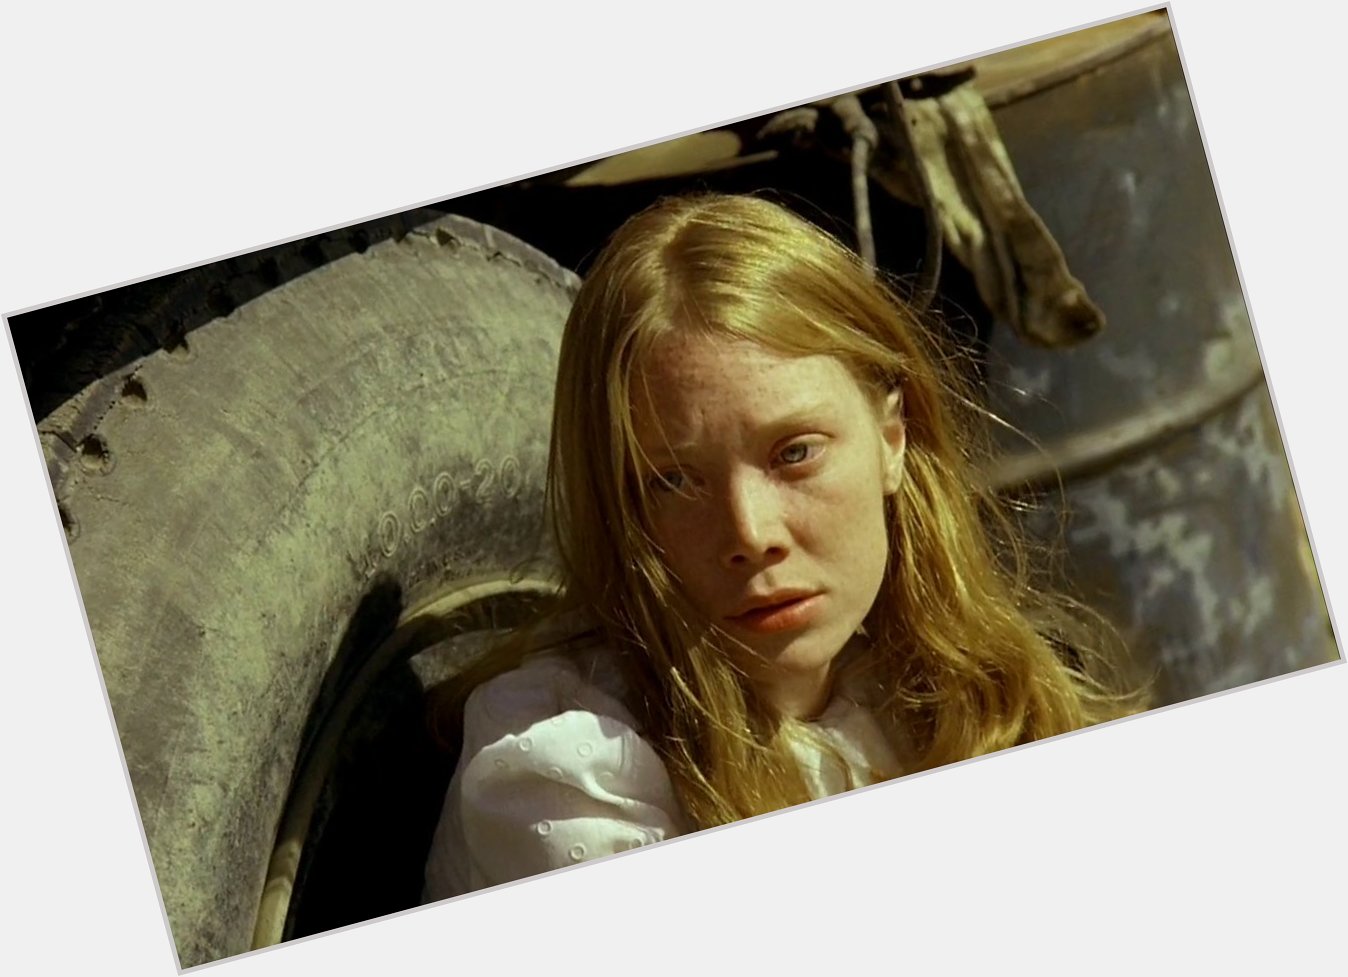 Happy birthday to our lord and savior, Sissy Spacek 